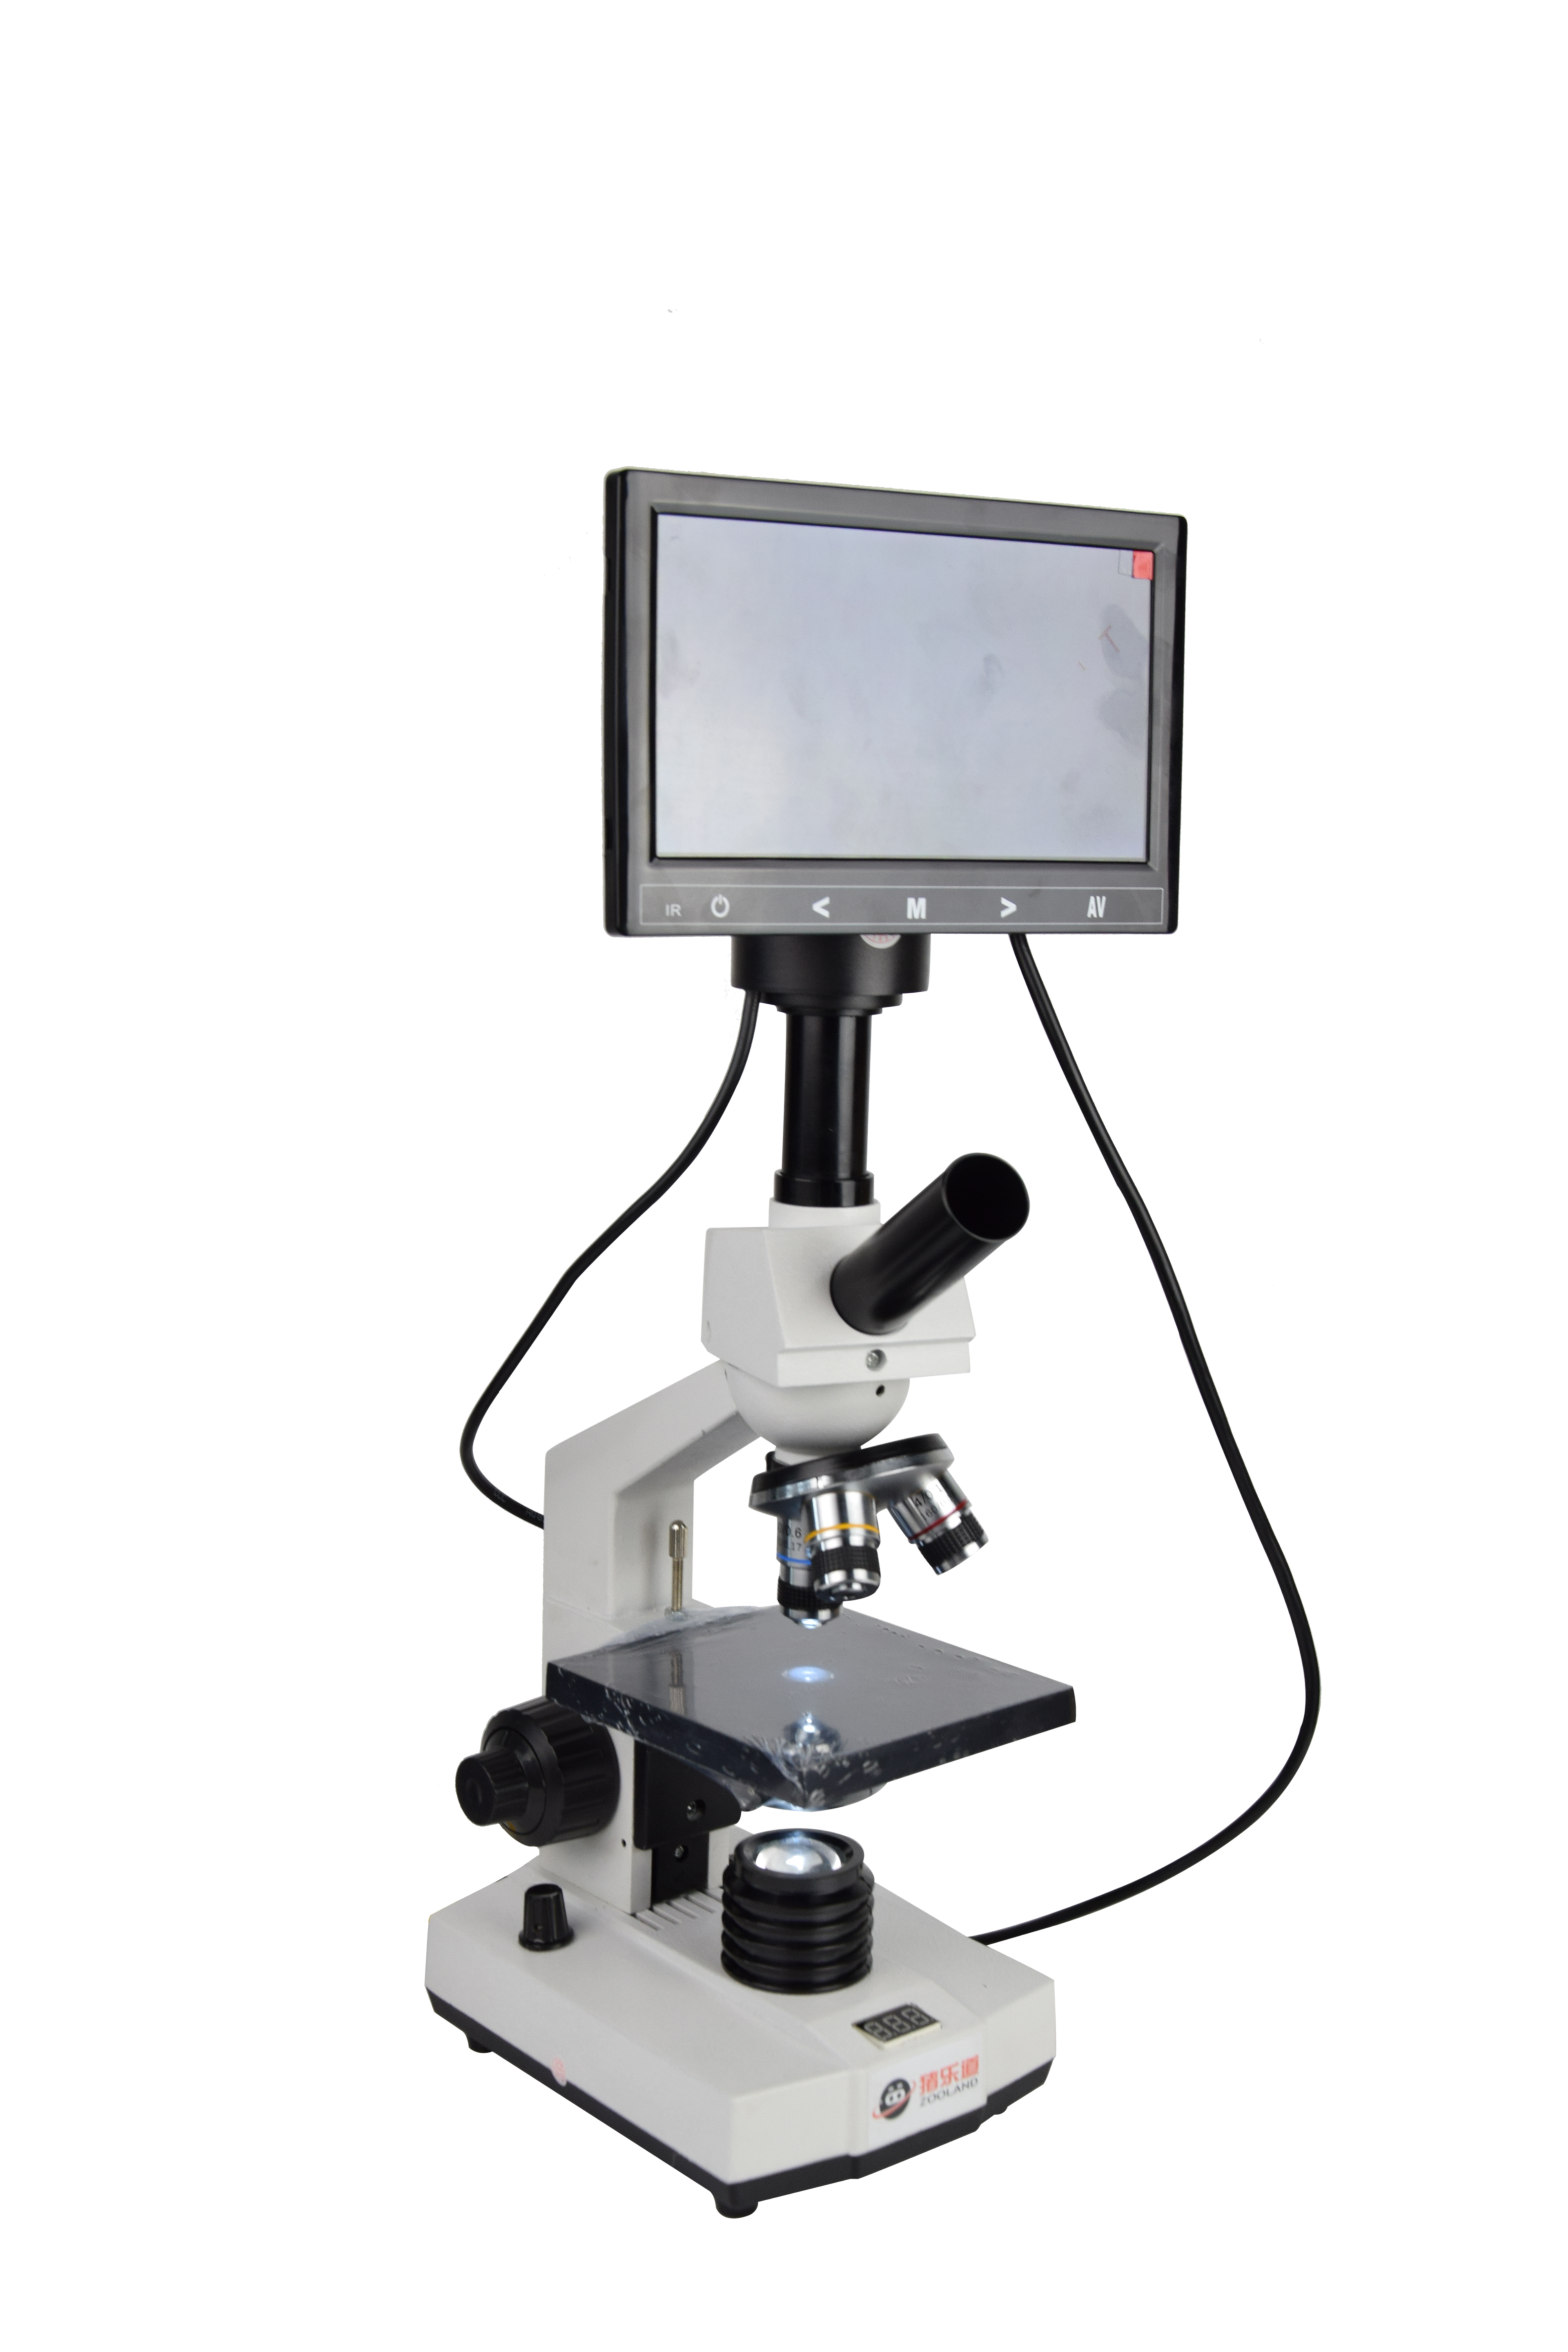 Pig artificial insemination thermostatic microscope with 7inch screen